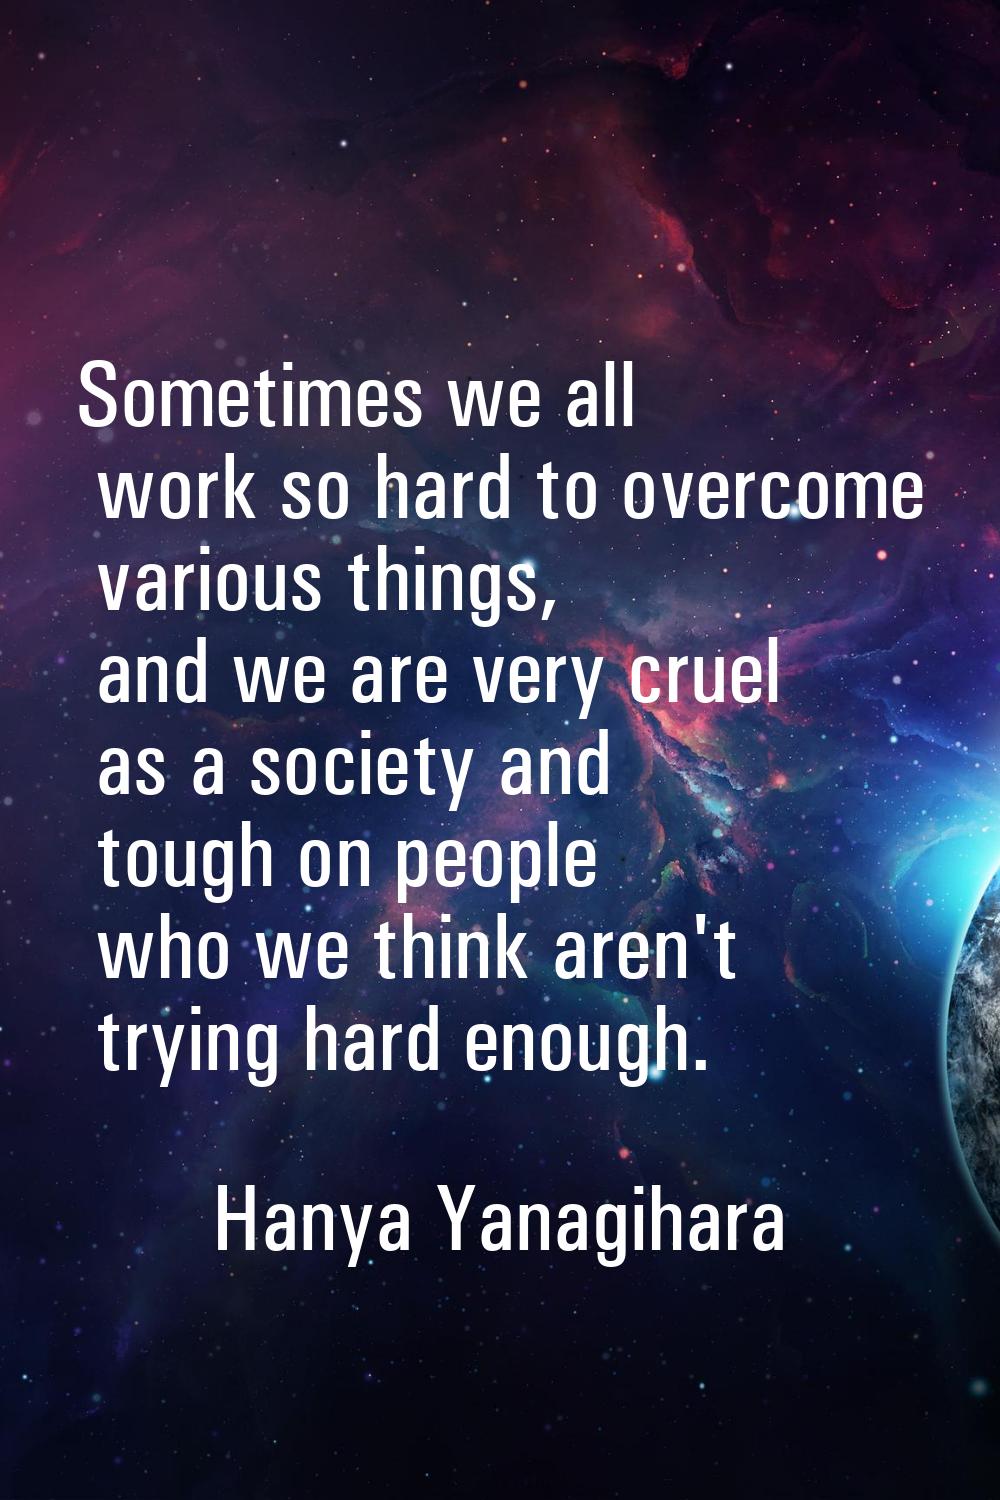 Sometimes we all work so hard to overcome various things, and we are very cruel as a society and to